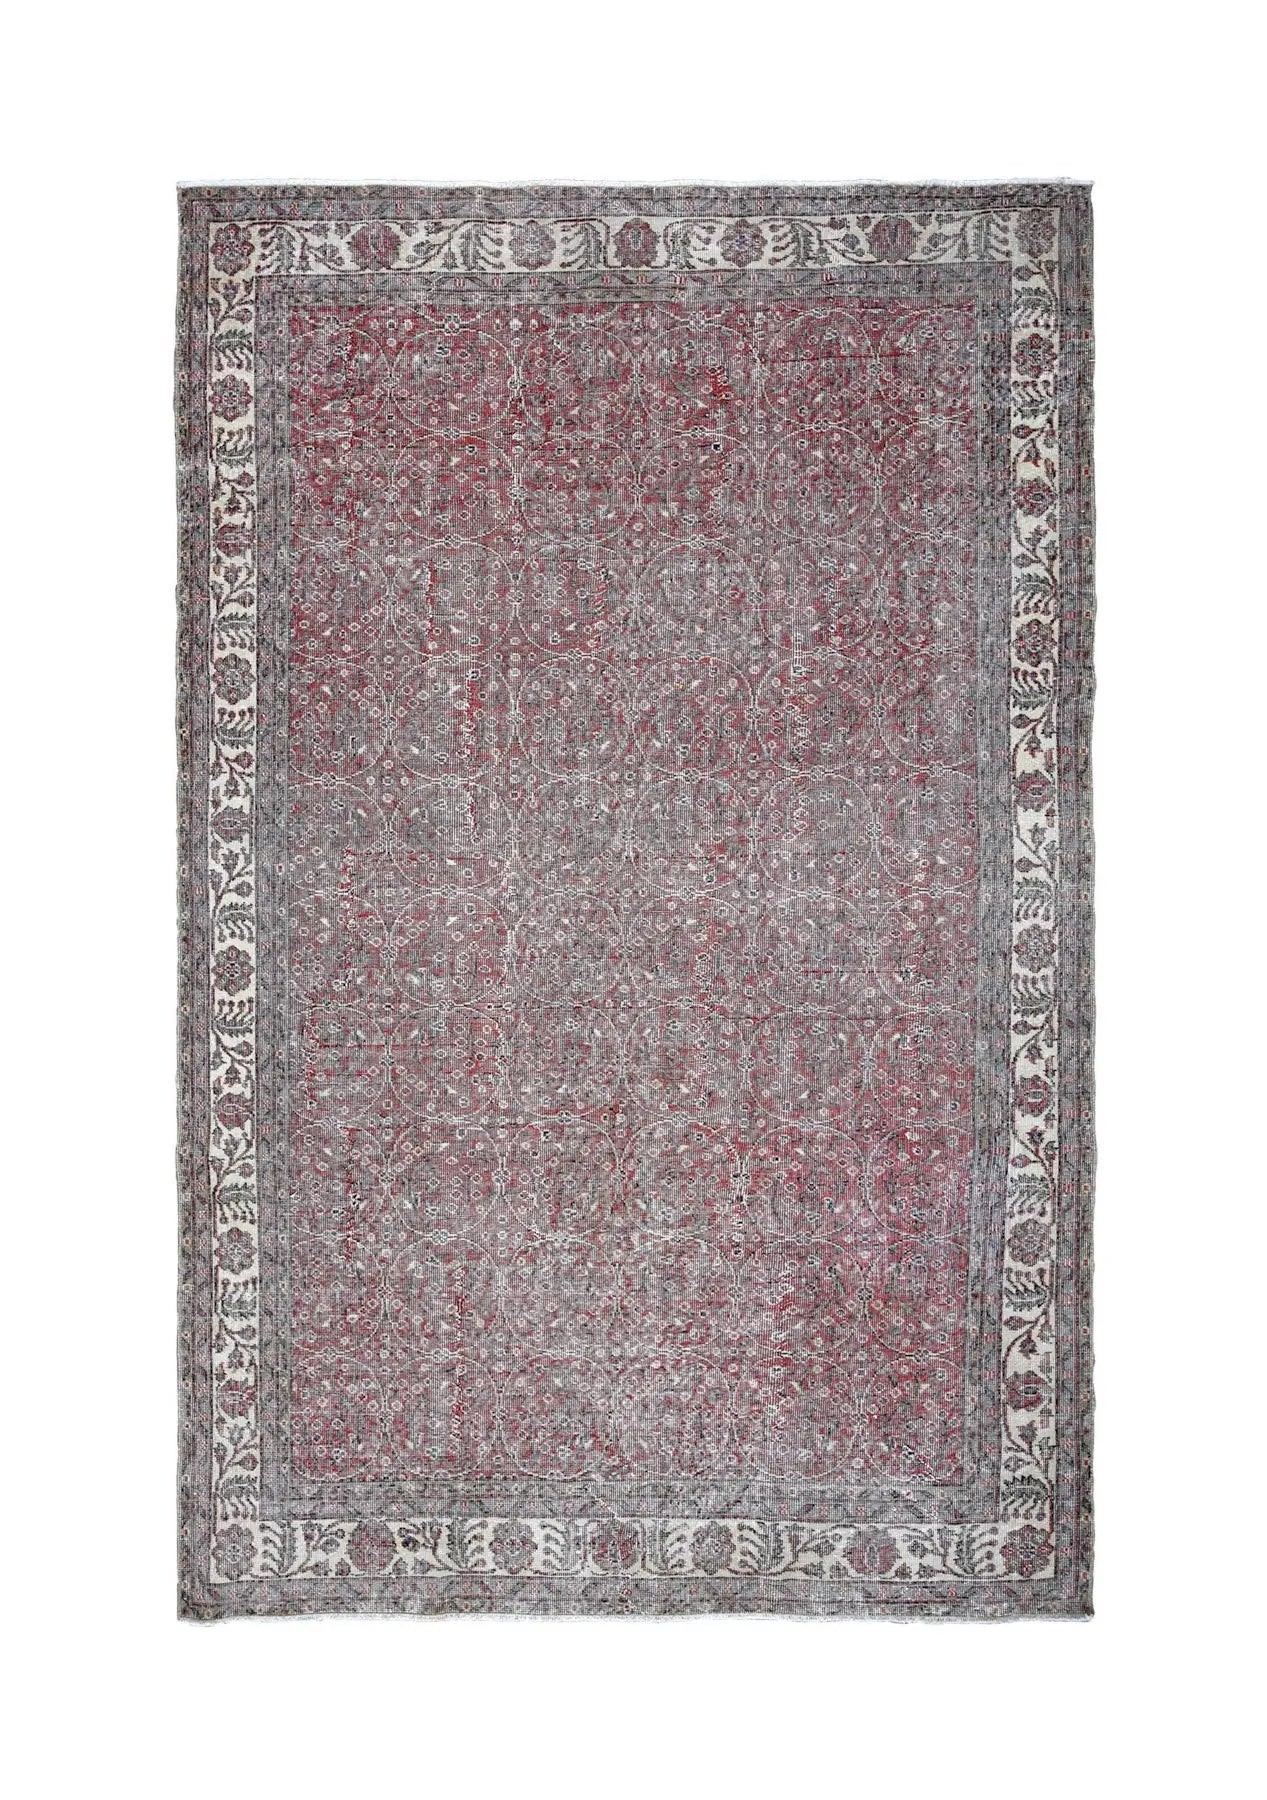 Gineen - Vintage Red Antique Washed Rug - kudenrugs